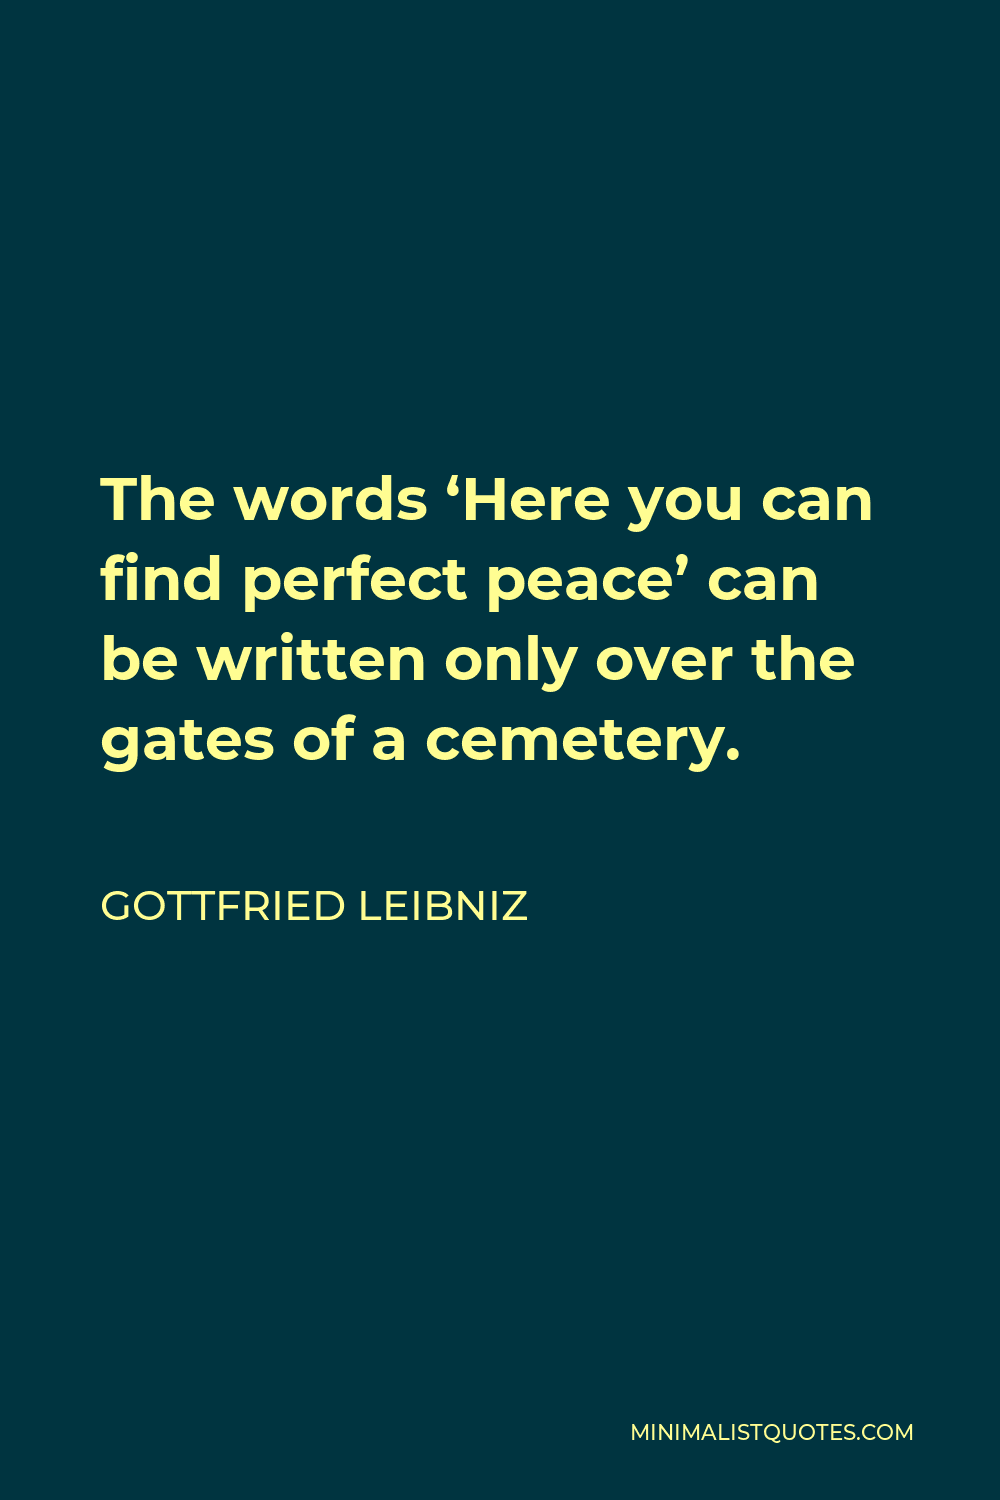 Gottfried Wilhelm Leibniz Quote - The words ‘Here you can find perfect peace’ can be written only over the gates of a cemetery.